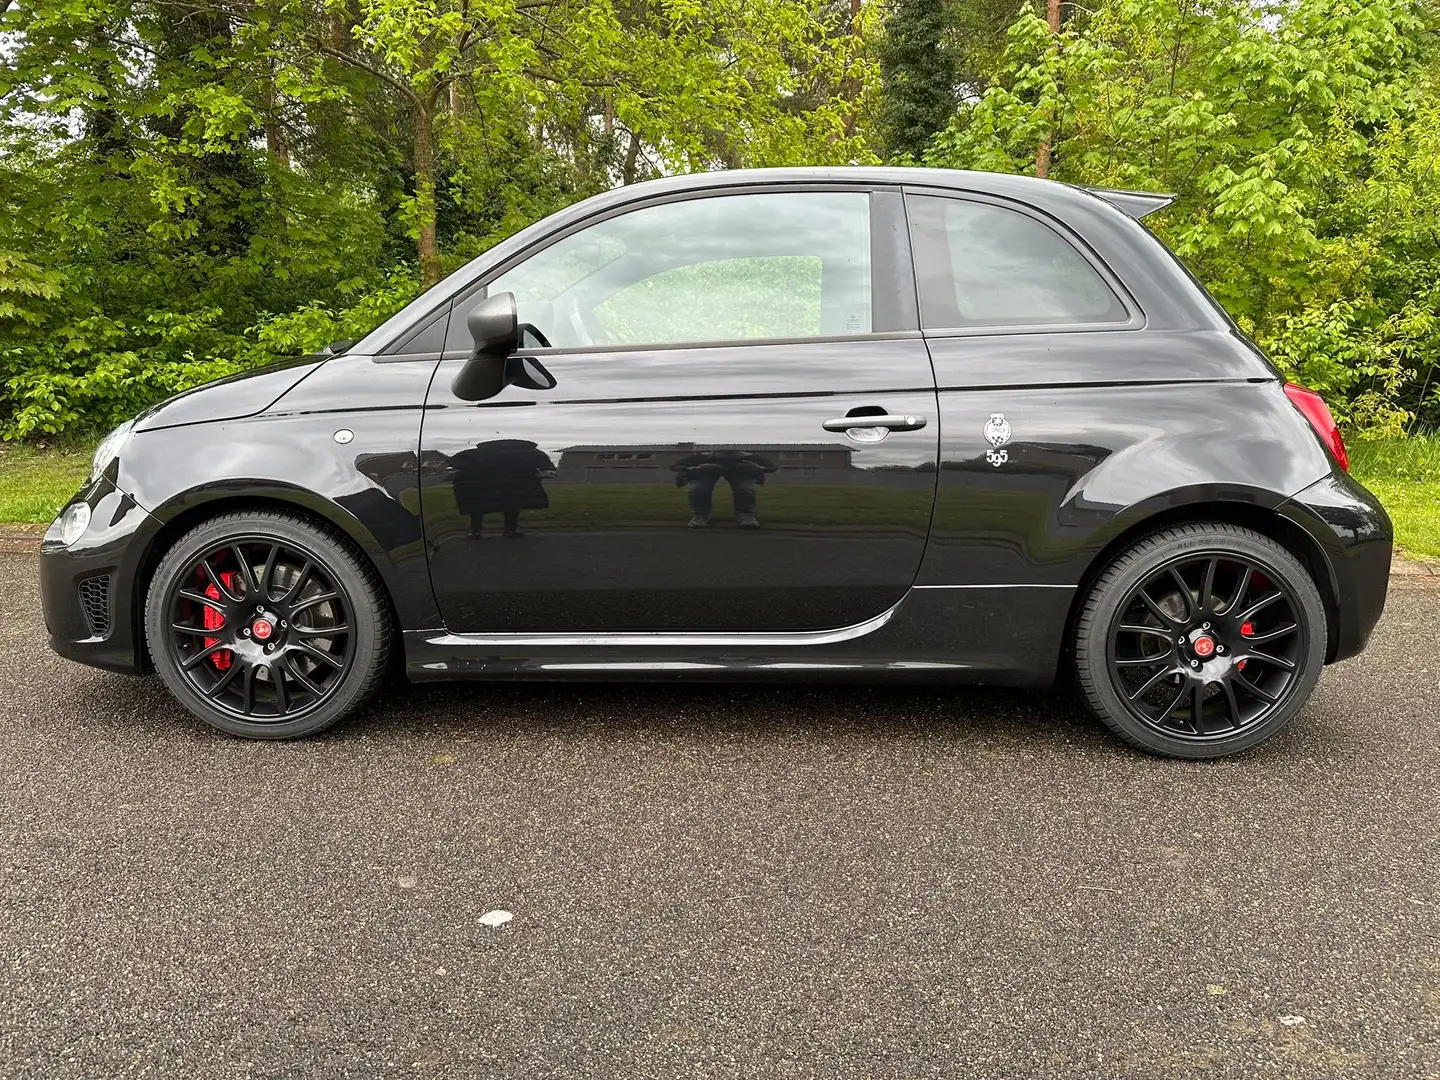 Abarth 595 Competizione 1.4 T-JET Abarth Corsa By Sabelt Carbon Leder crna - 2